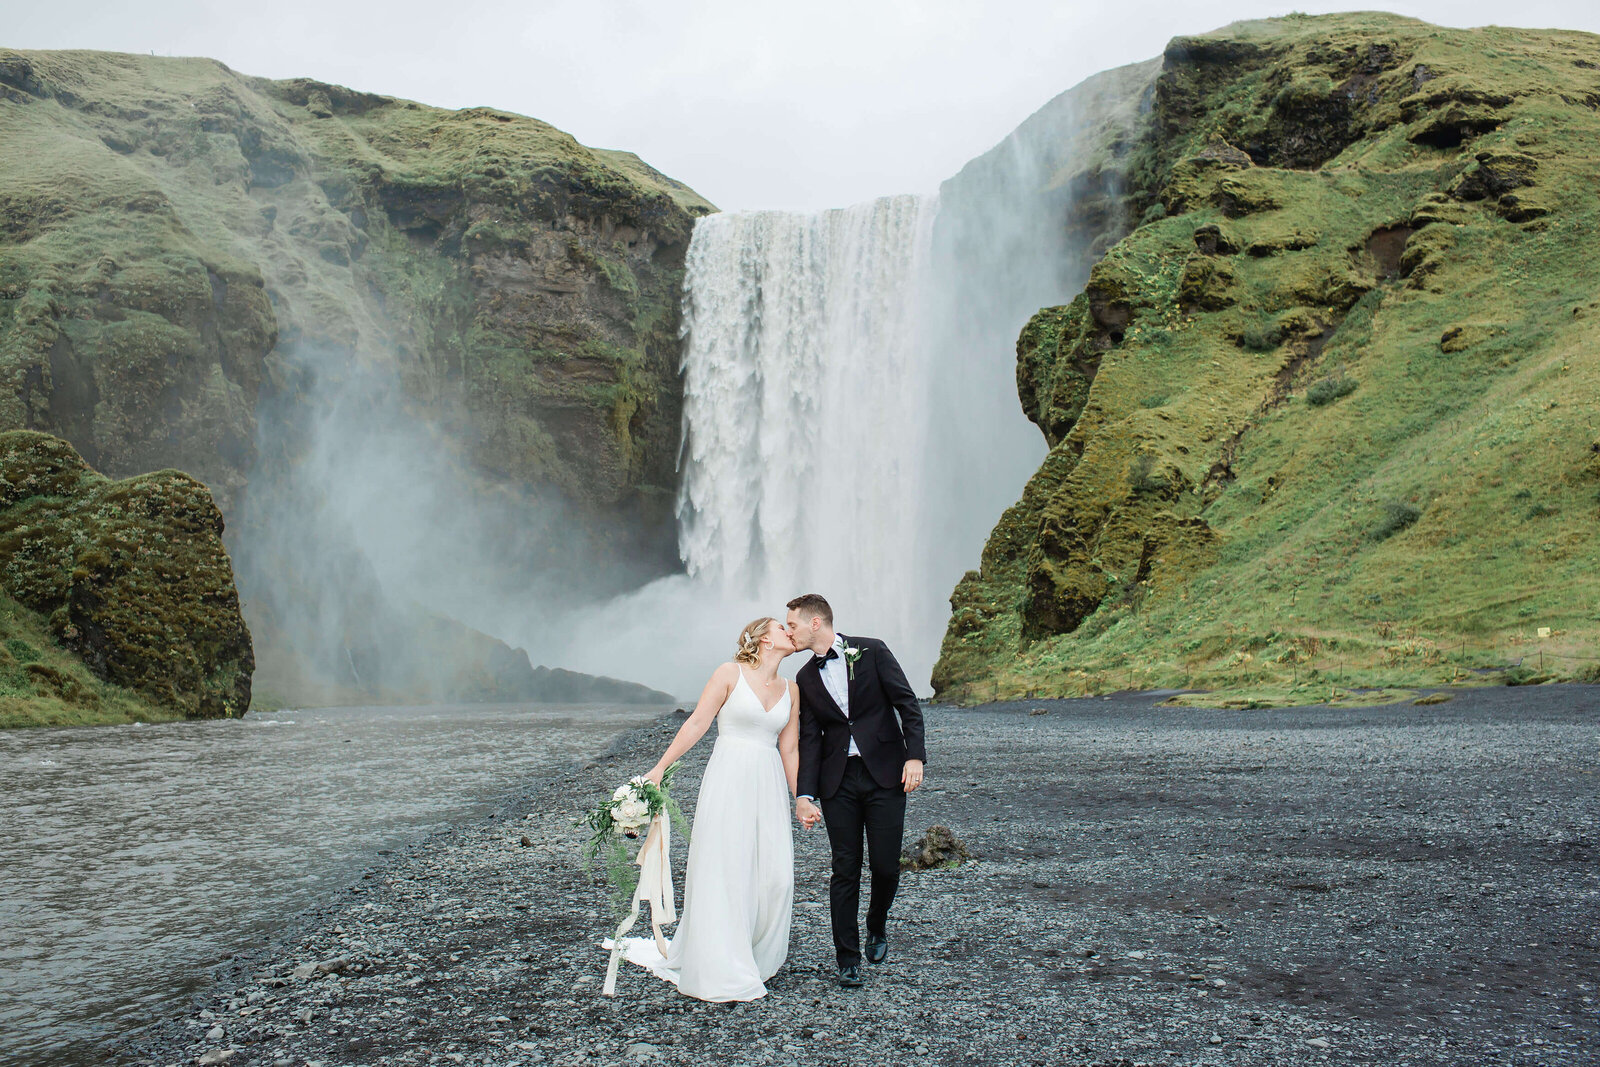 Nicole and Michael kiss in front of the epic Skogafoss waterfall on their wedding day. We had so much fun and it's a day I'll truly cherish forever! 